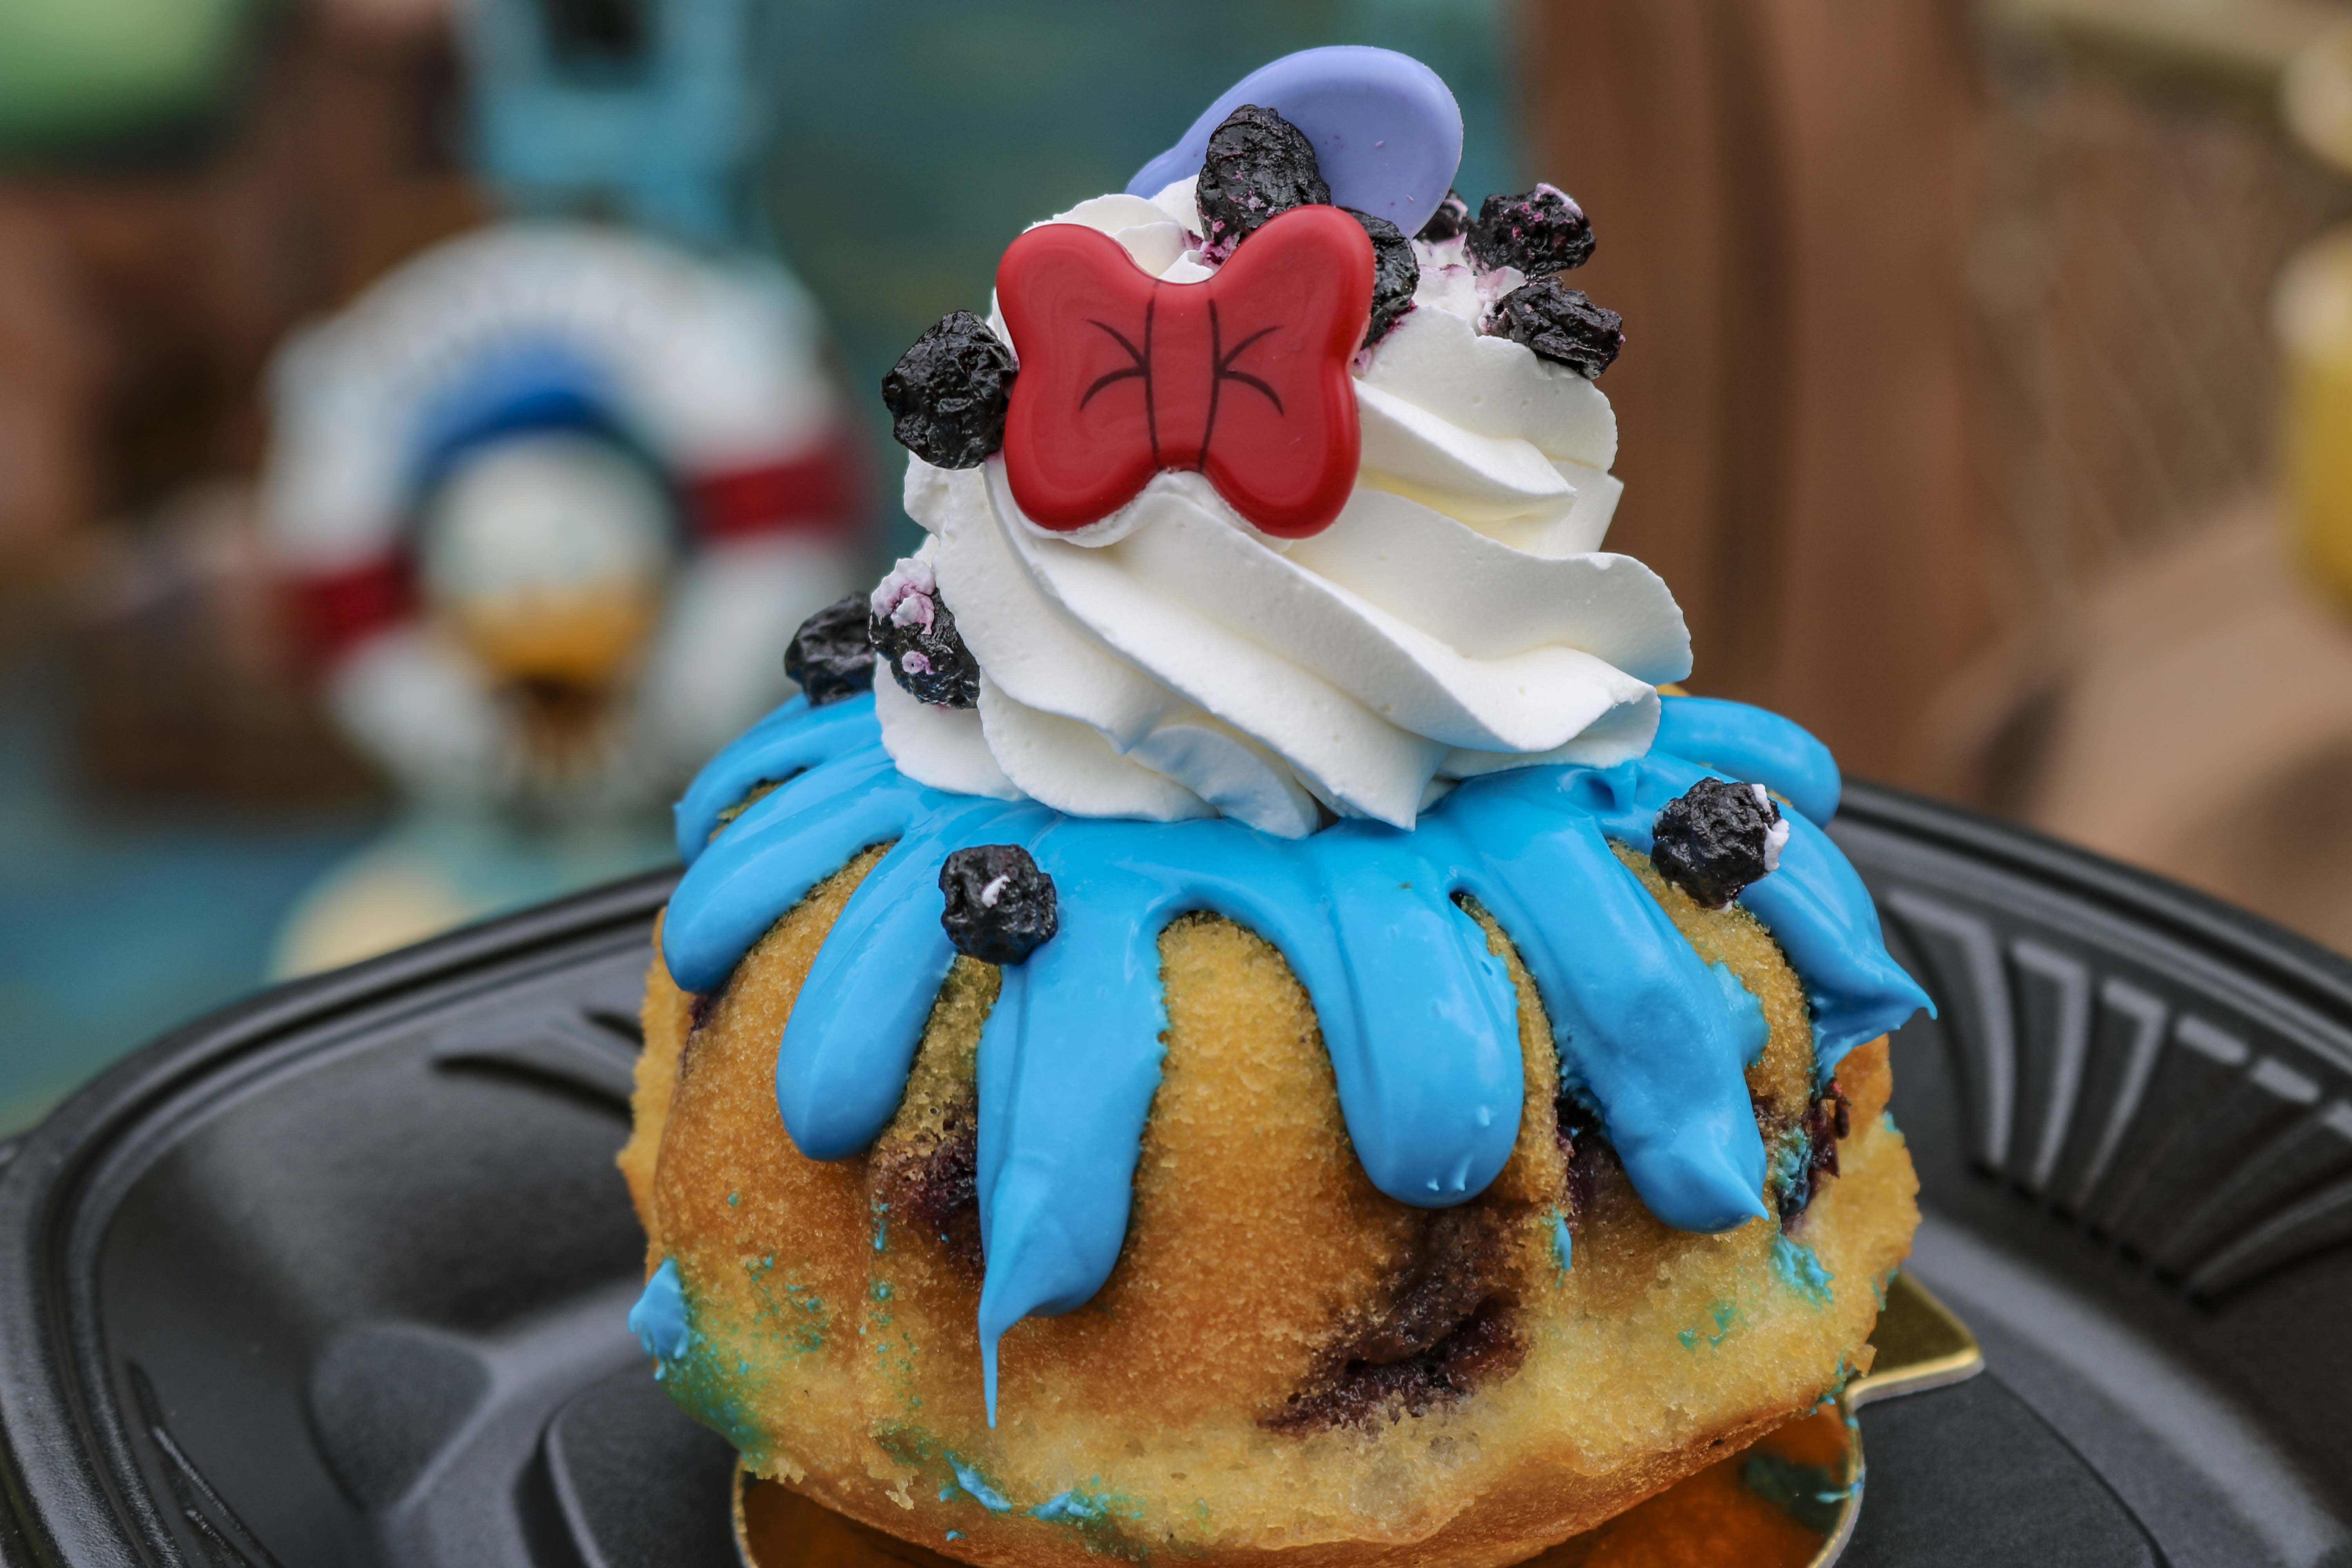 The original angry duck gets his own dessert. Are you going to try it?